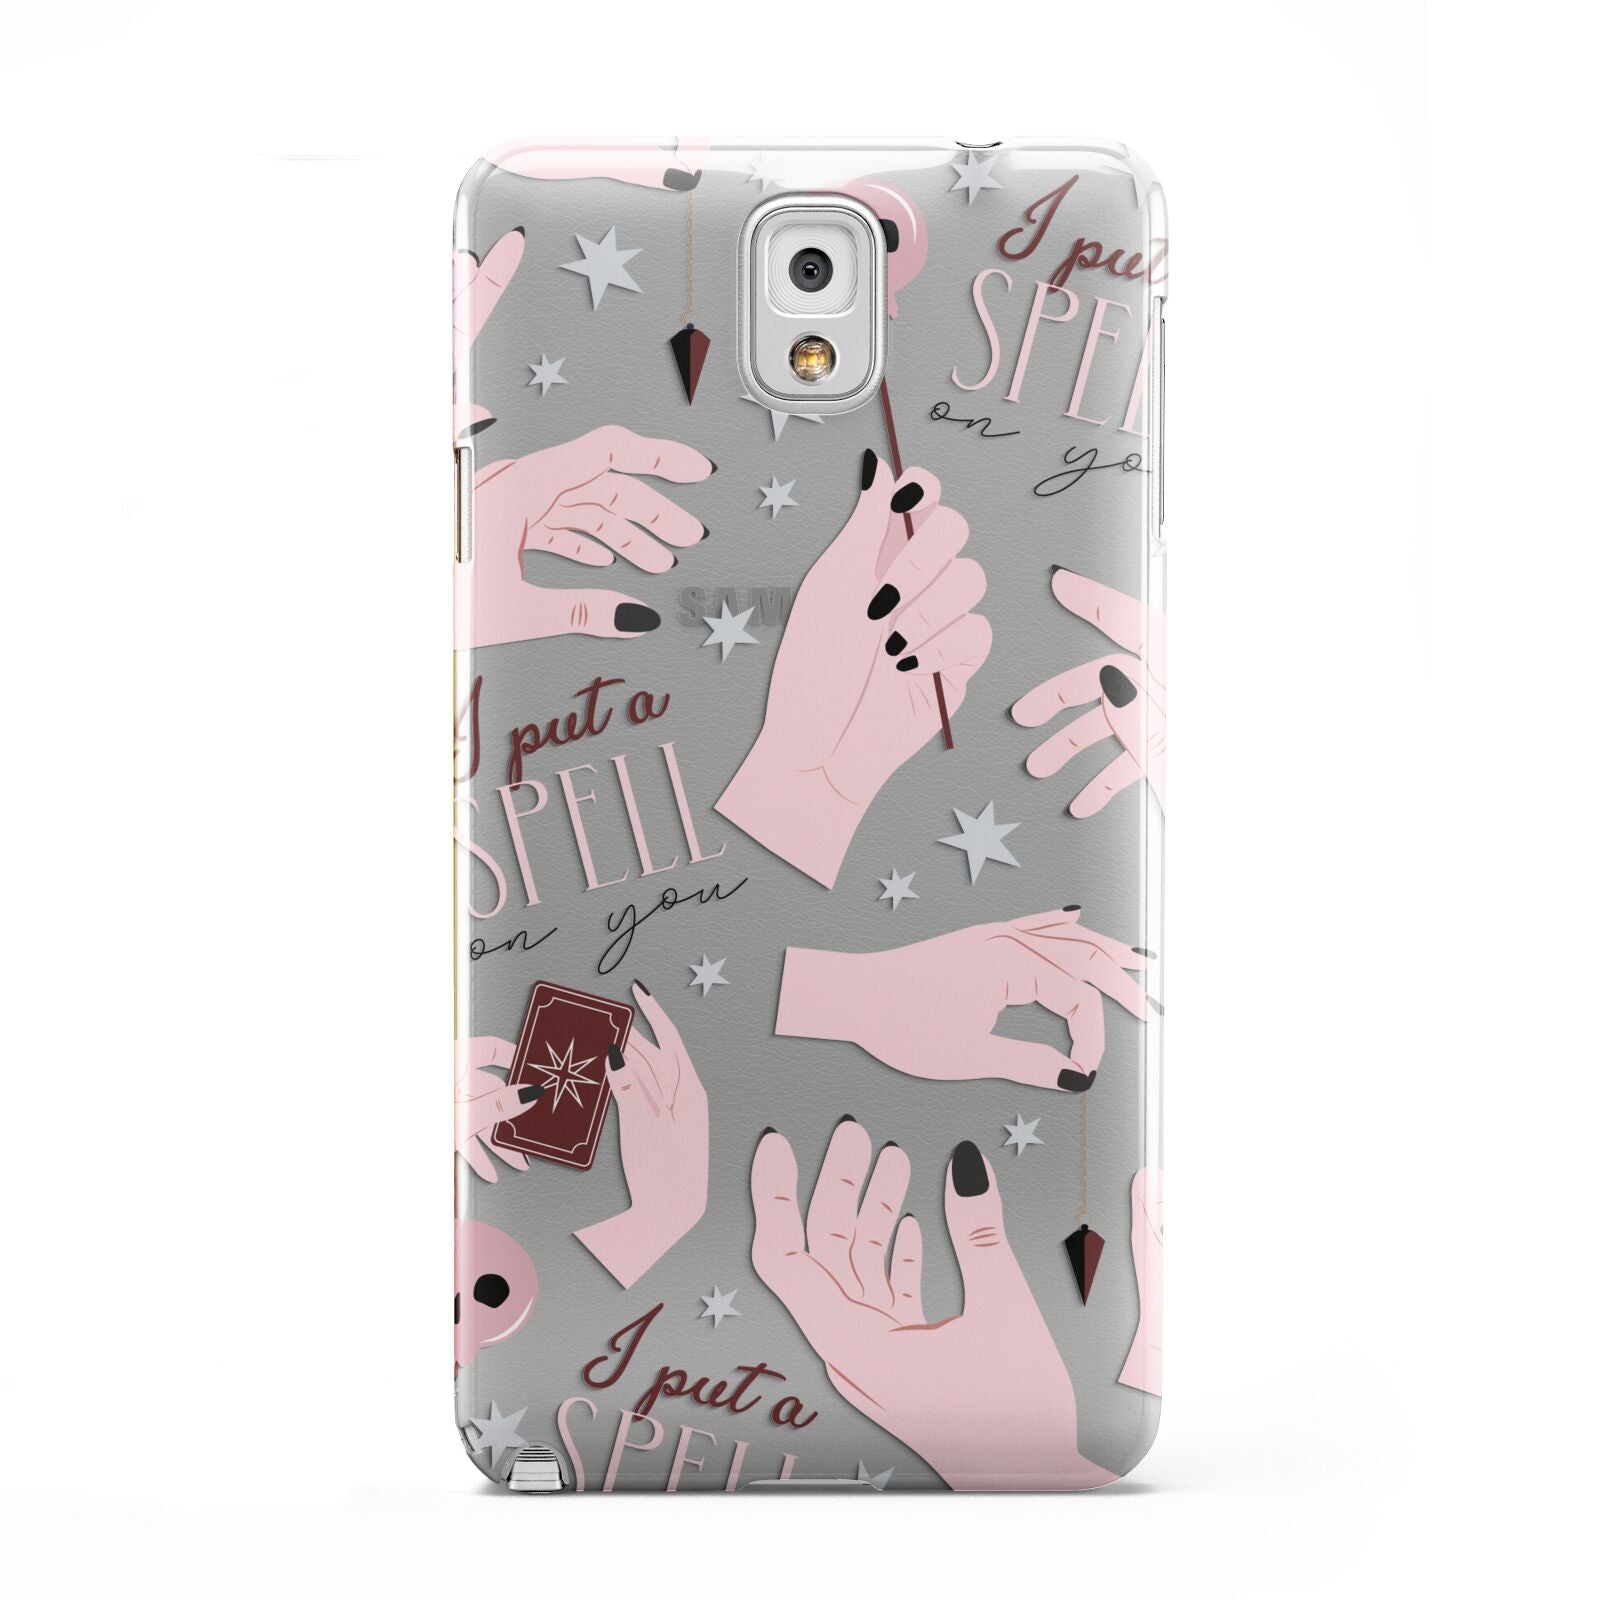 Witches Hands and Tarot Cards Samsung Galaxy Note 3 Case